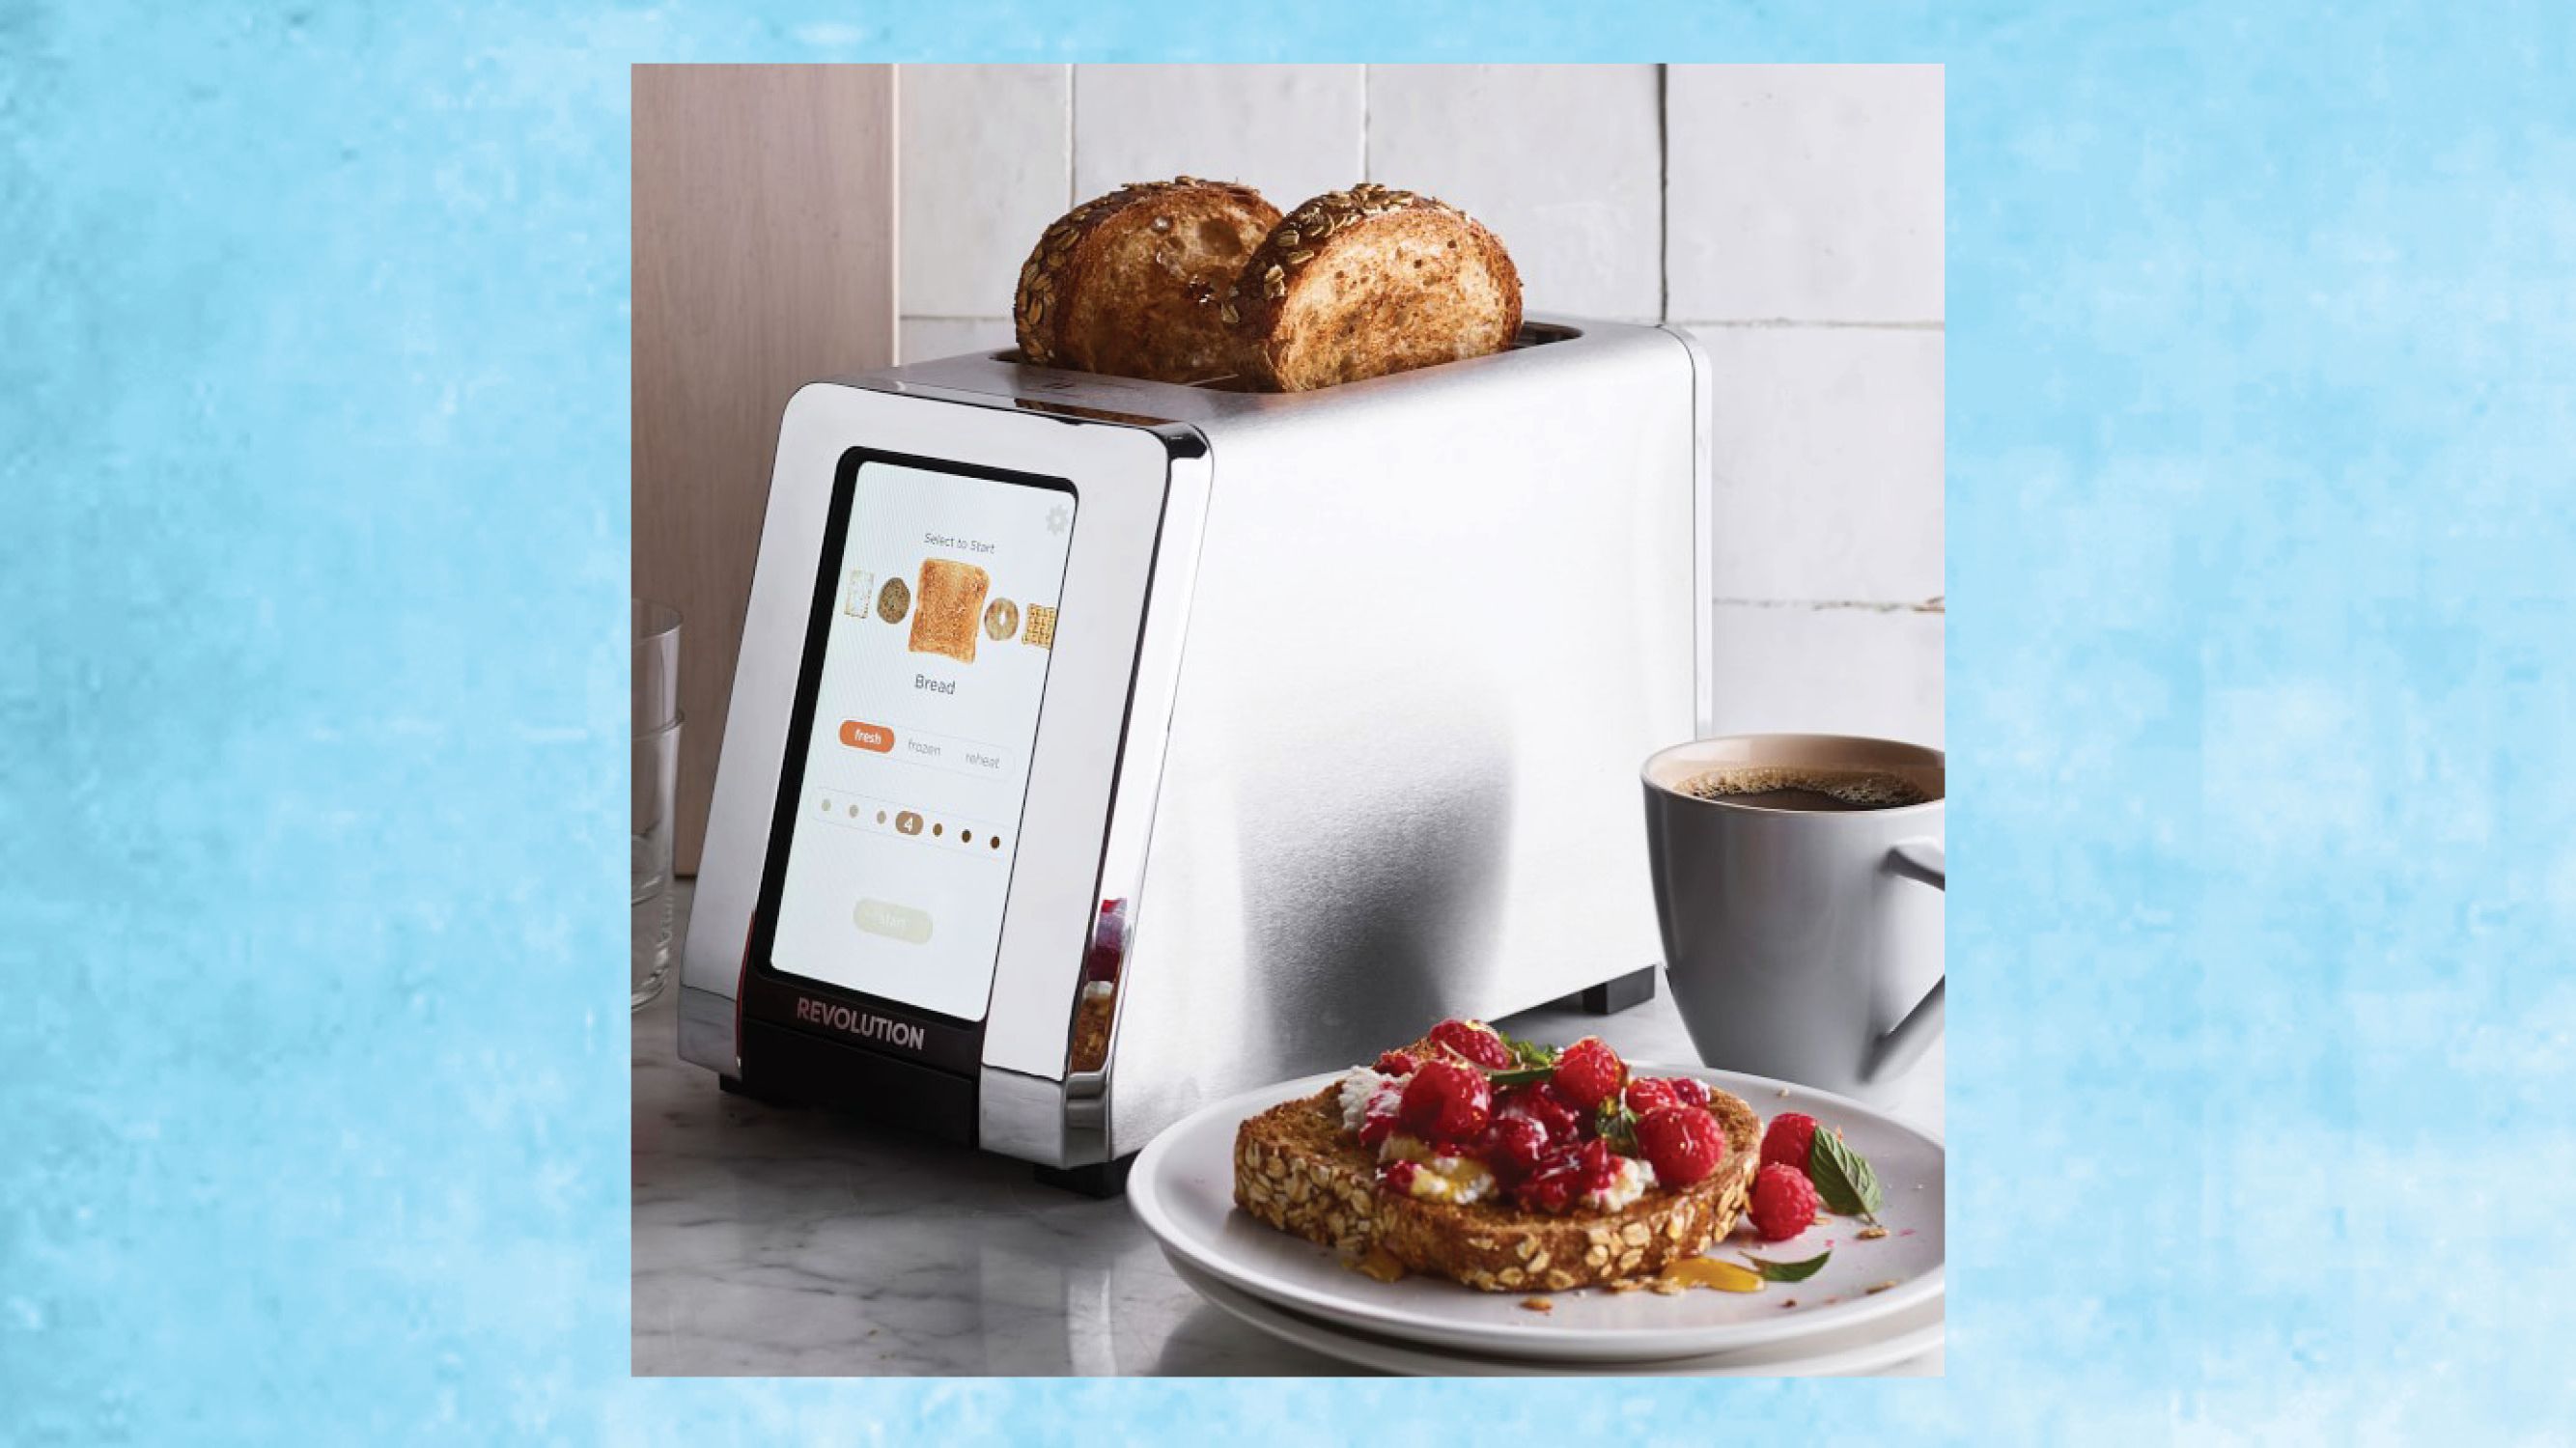 This Smart-Toaster That I Love Is A Great Gift To Give